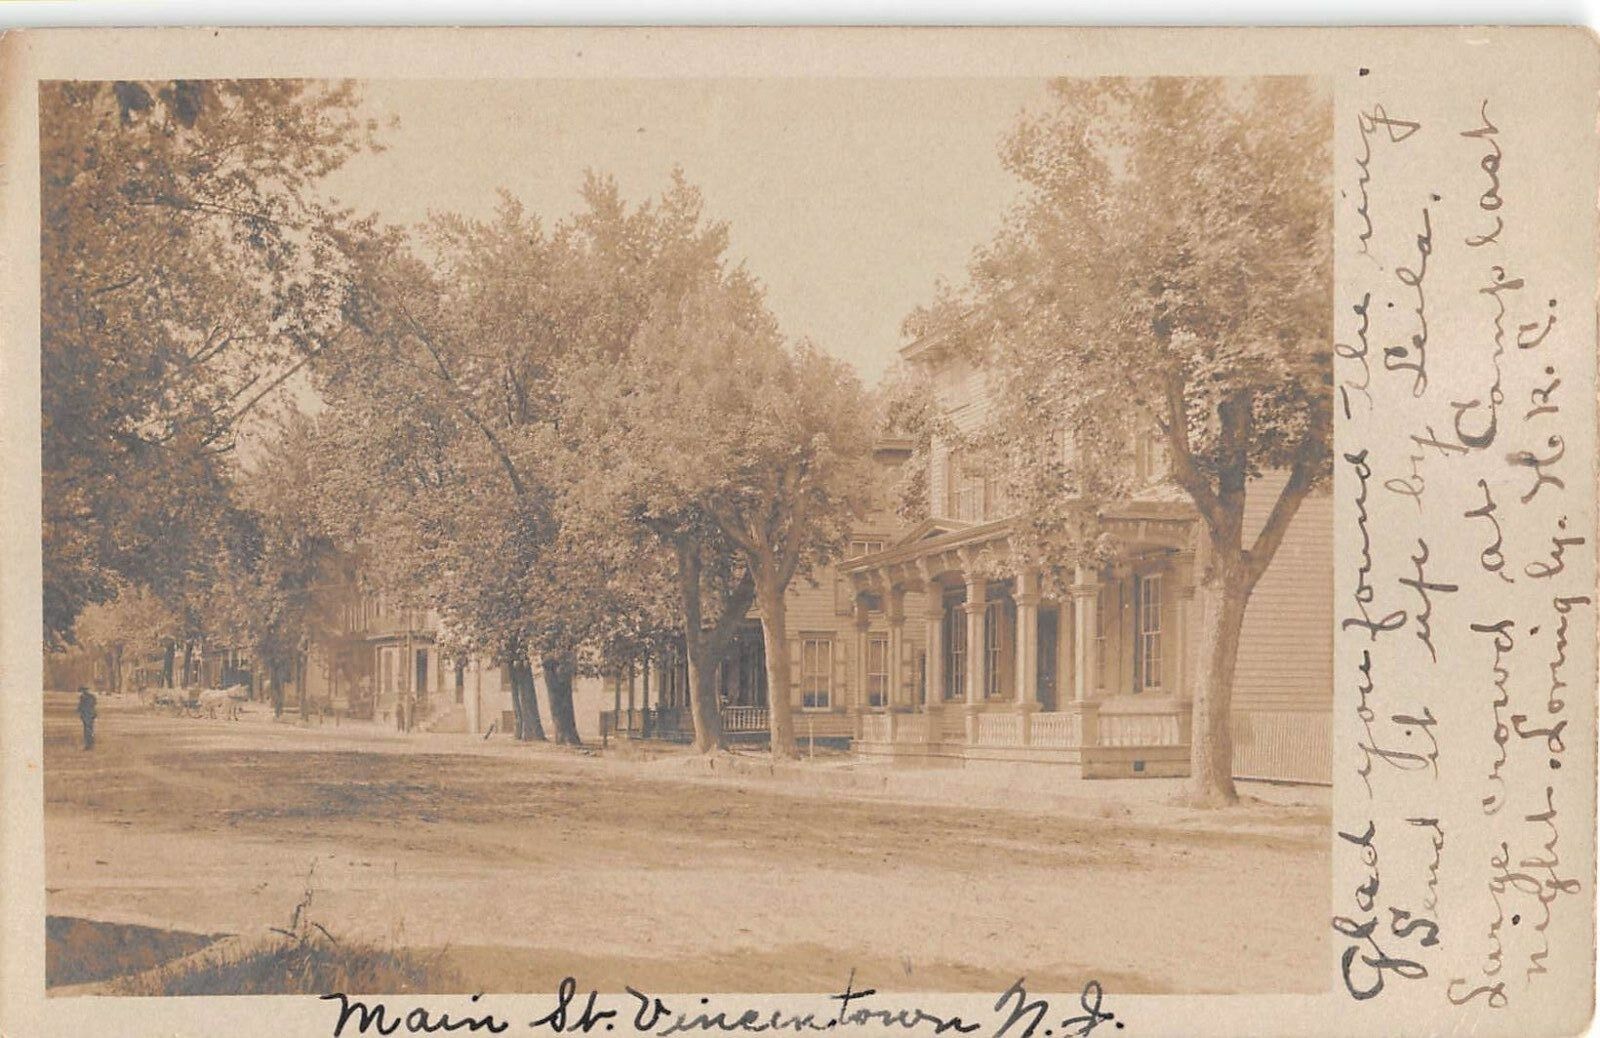 Vincentown - Homes on Main Street - 1906